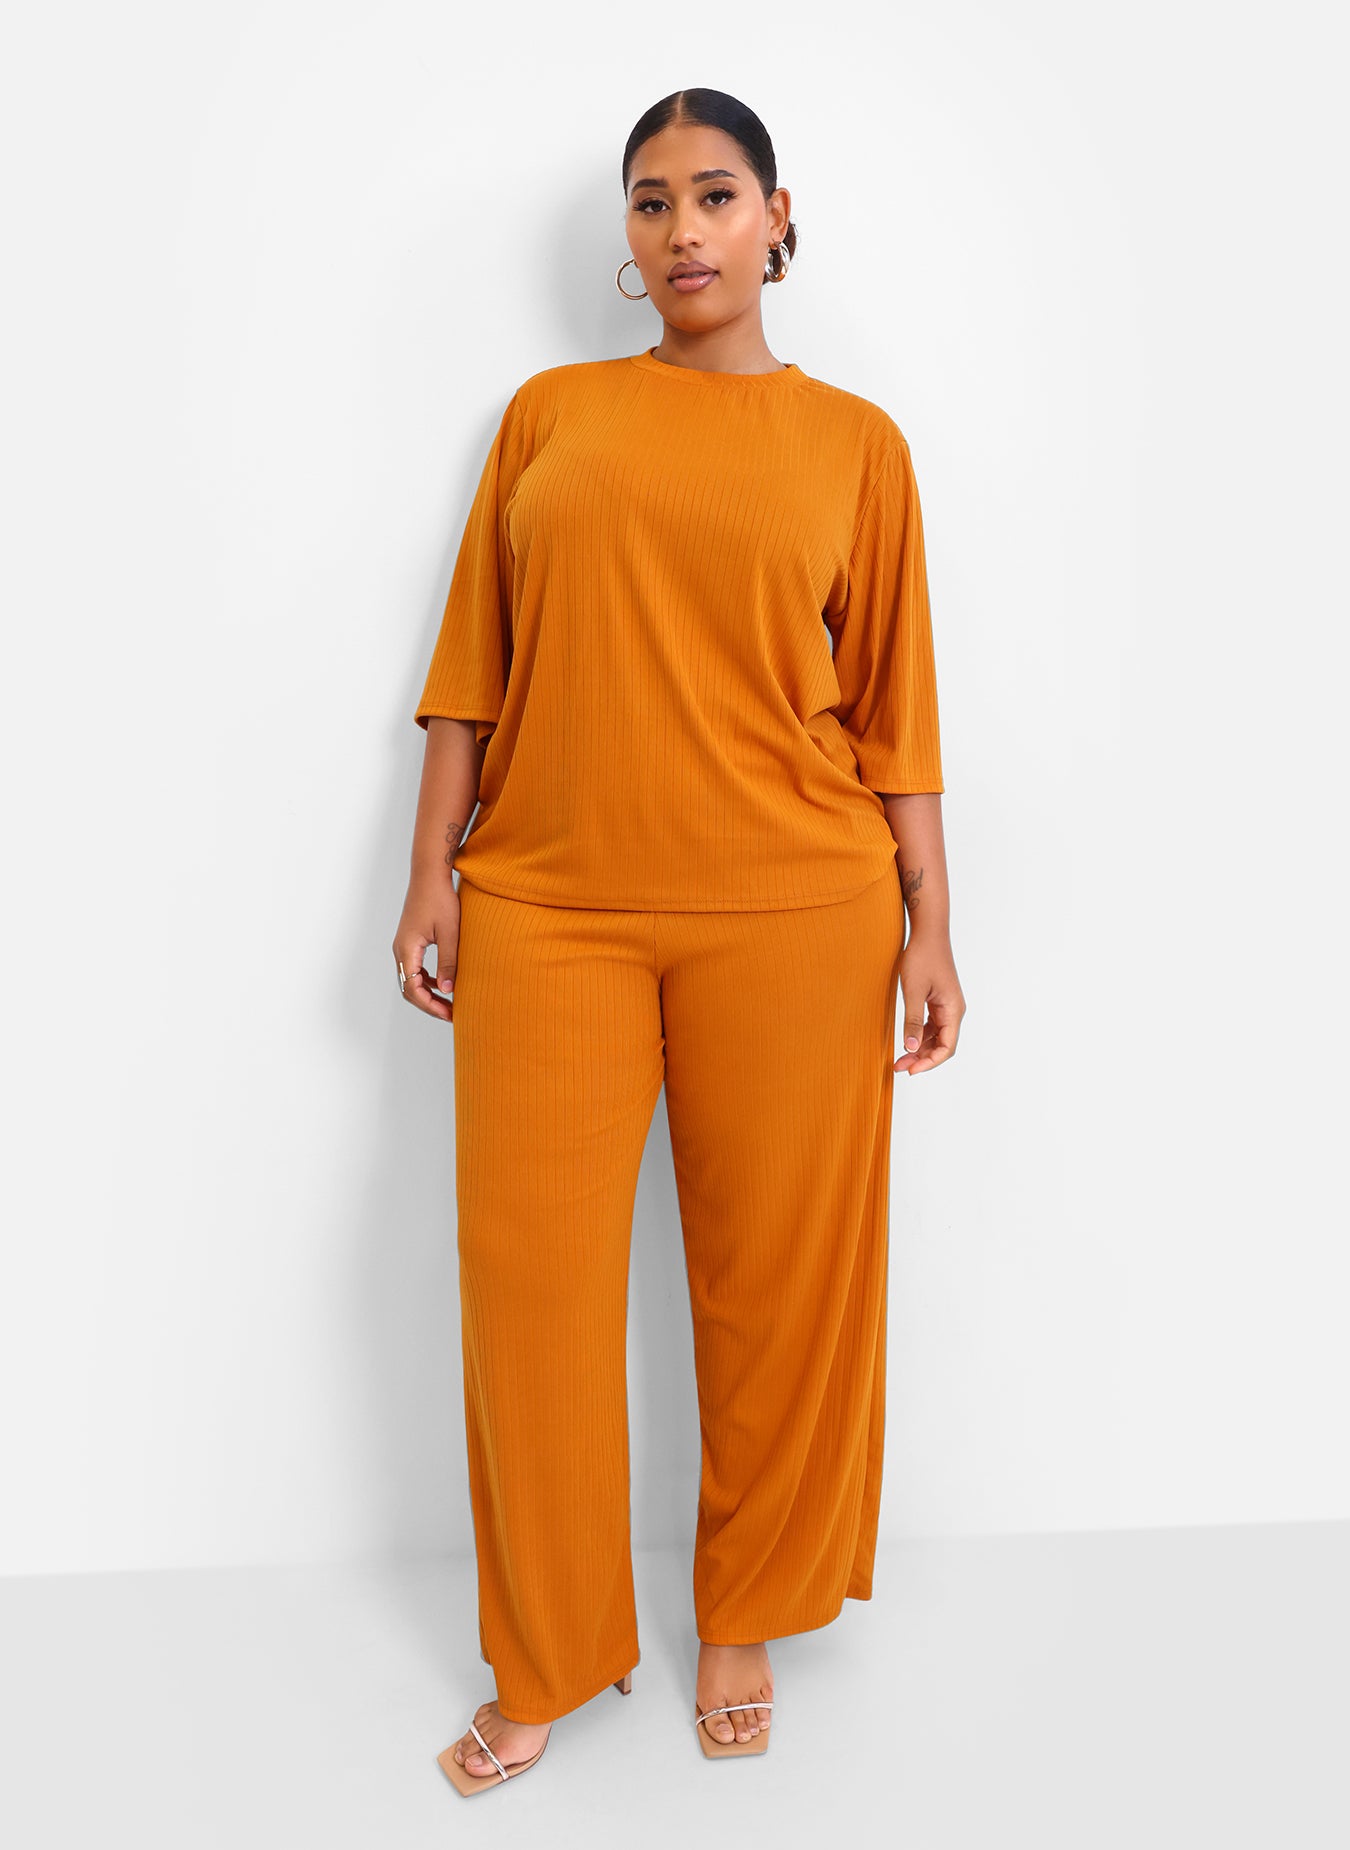 Give it Away Ribbed Oversized Top